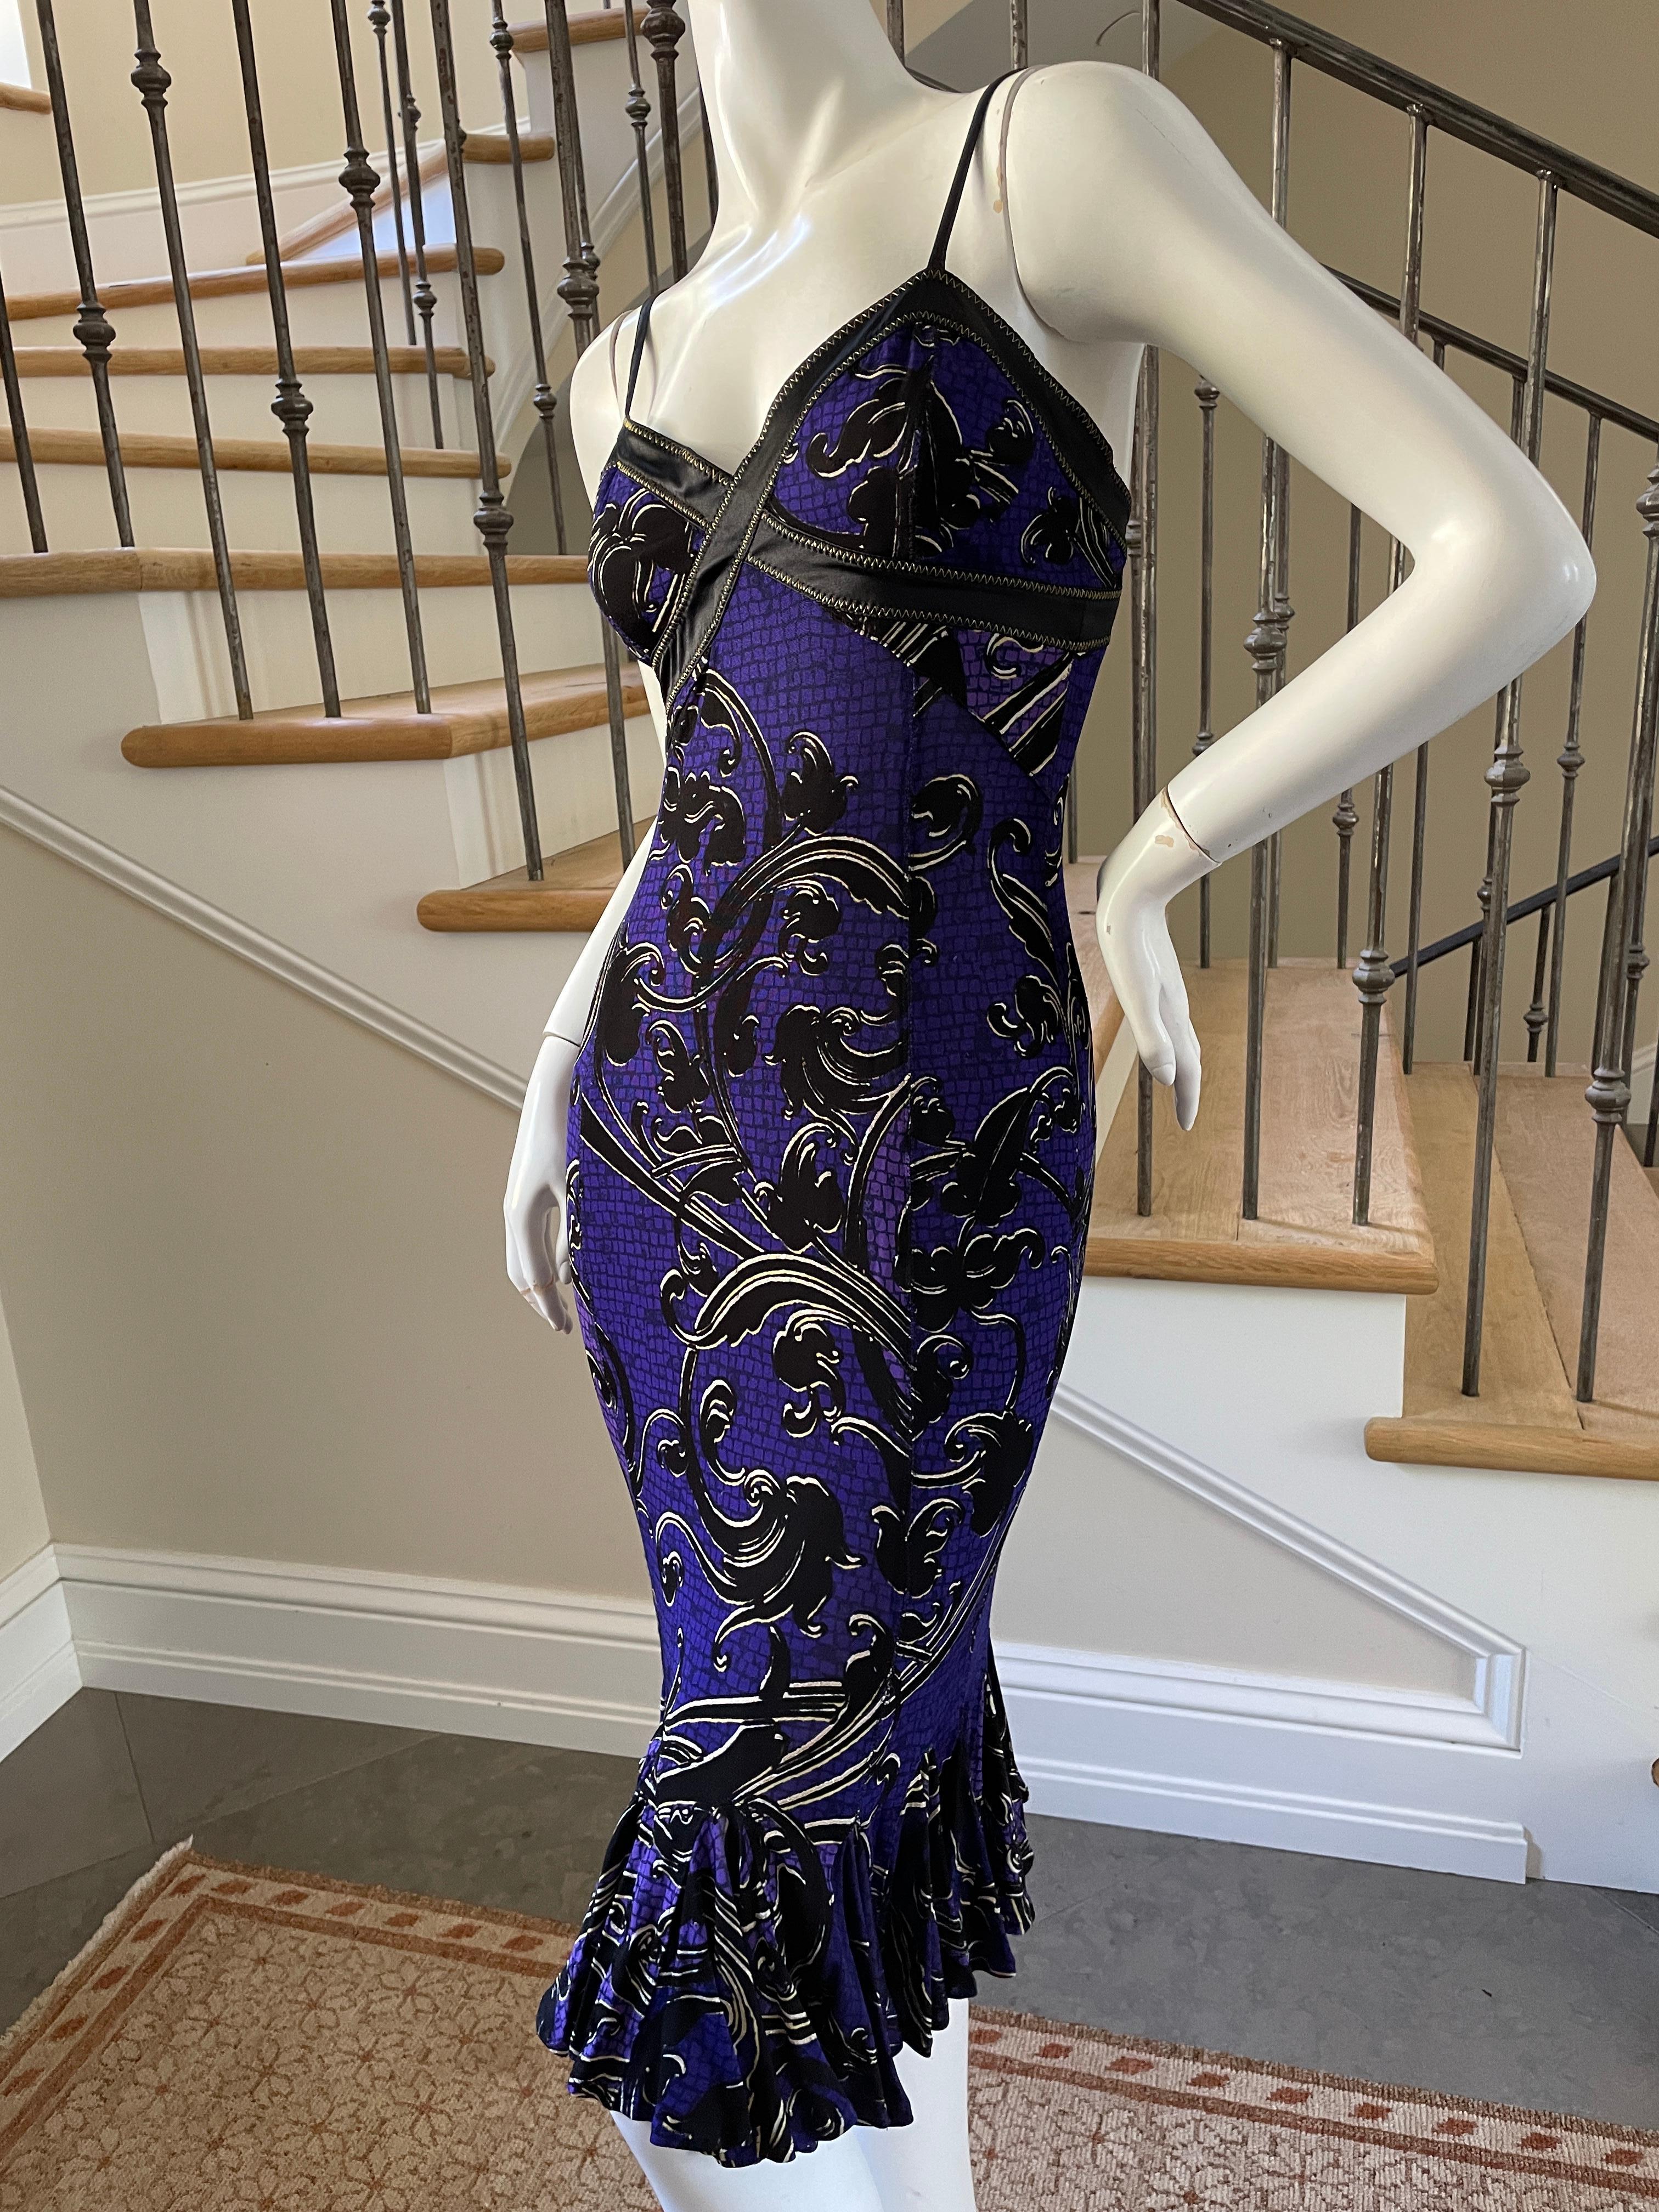 Roberto Cavalli for Just Cavalli Purple Flounce Hem Dress with Gold Stitching
 Sz 42
 This is so pretty, looks better on live model.
Bust 33